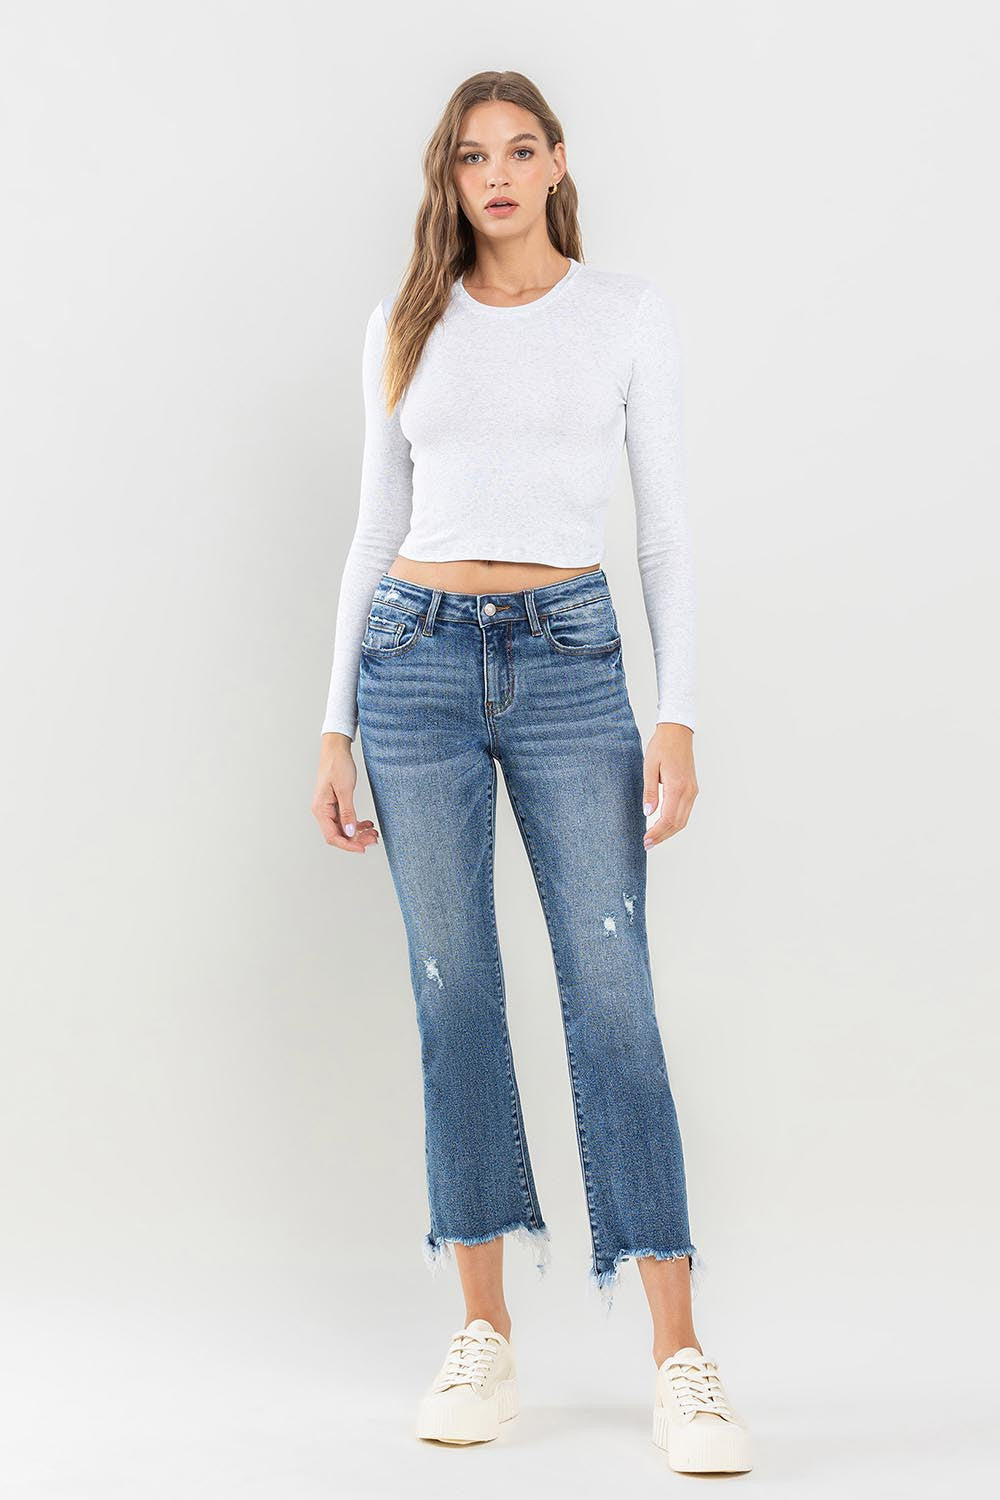 Lovervet Mid Rise Frayed Cropped Jeans Pants RYSE Clothing Co.   